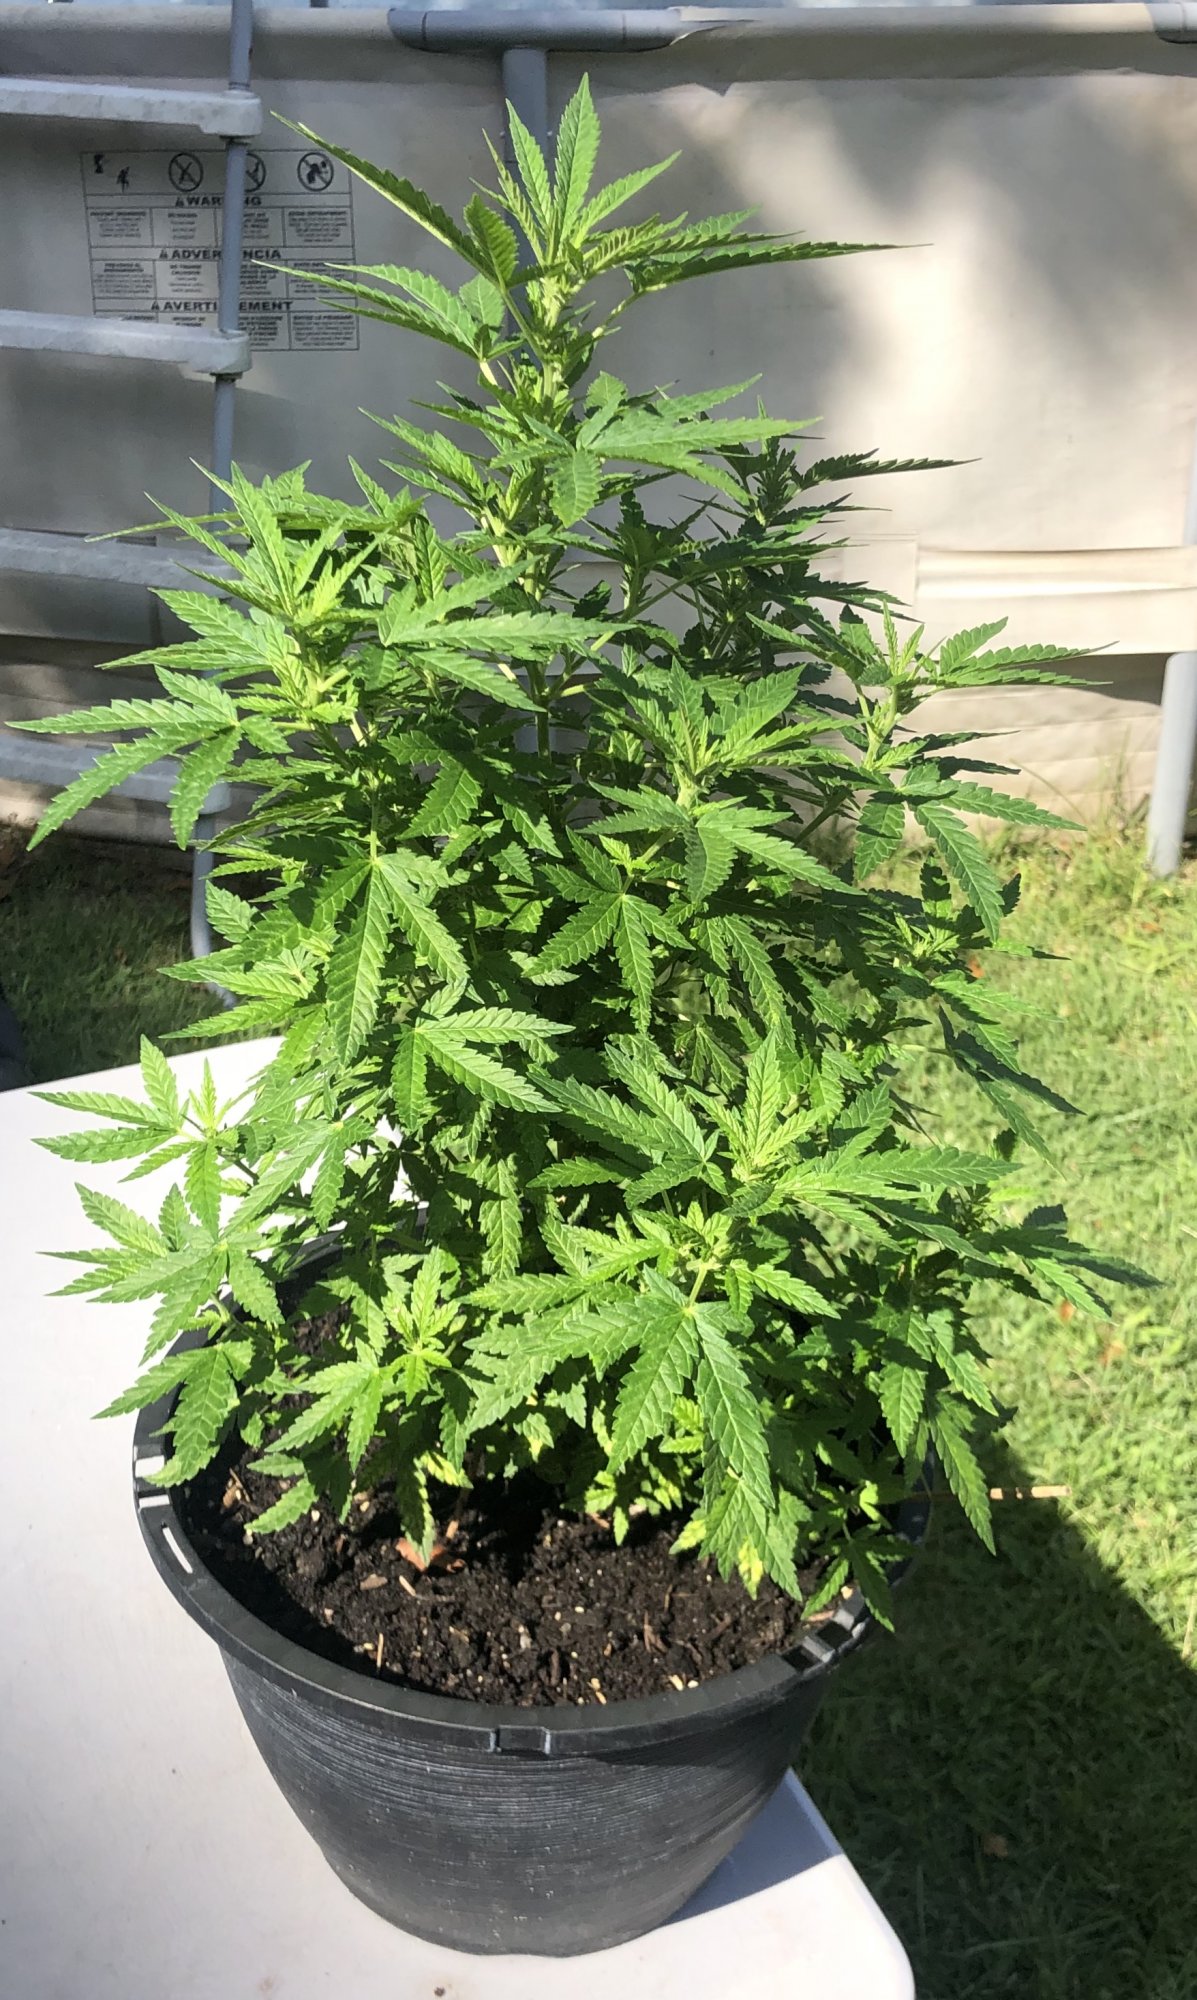 First time outdoor still learning any tips or advise greatly appreciated 13